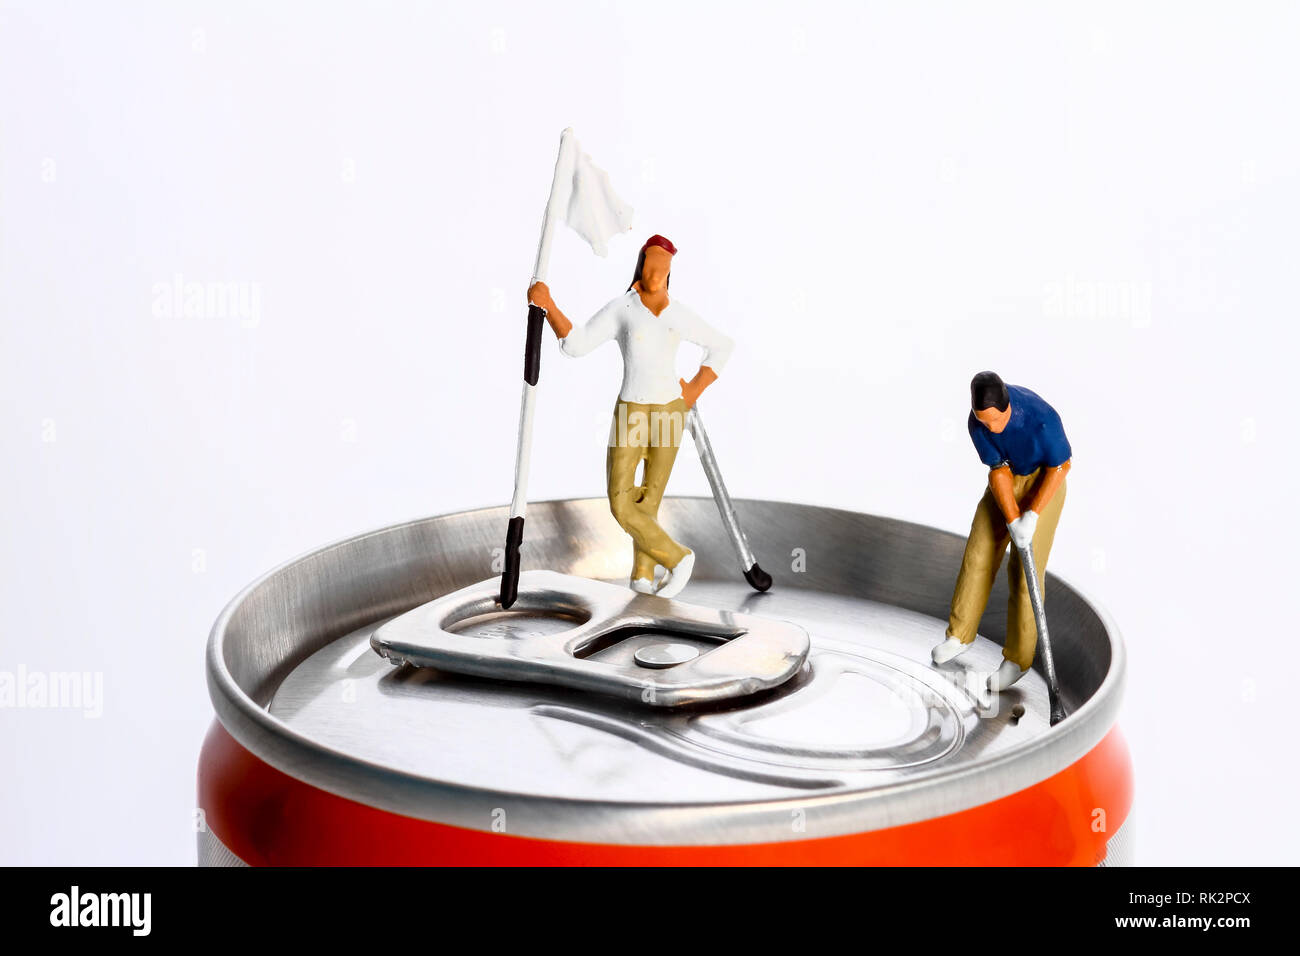 Conceptual diorama image of a miniture figure couple playing golf on a drinks can Stock Photo